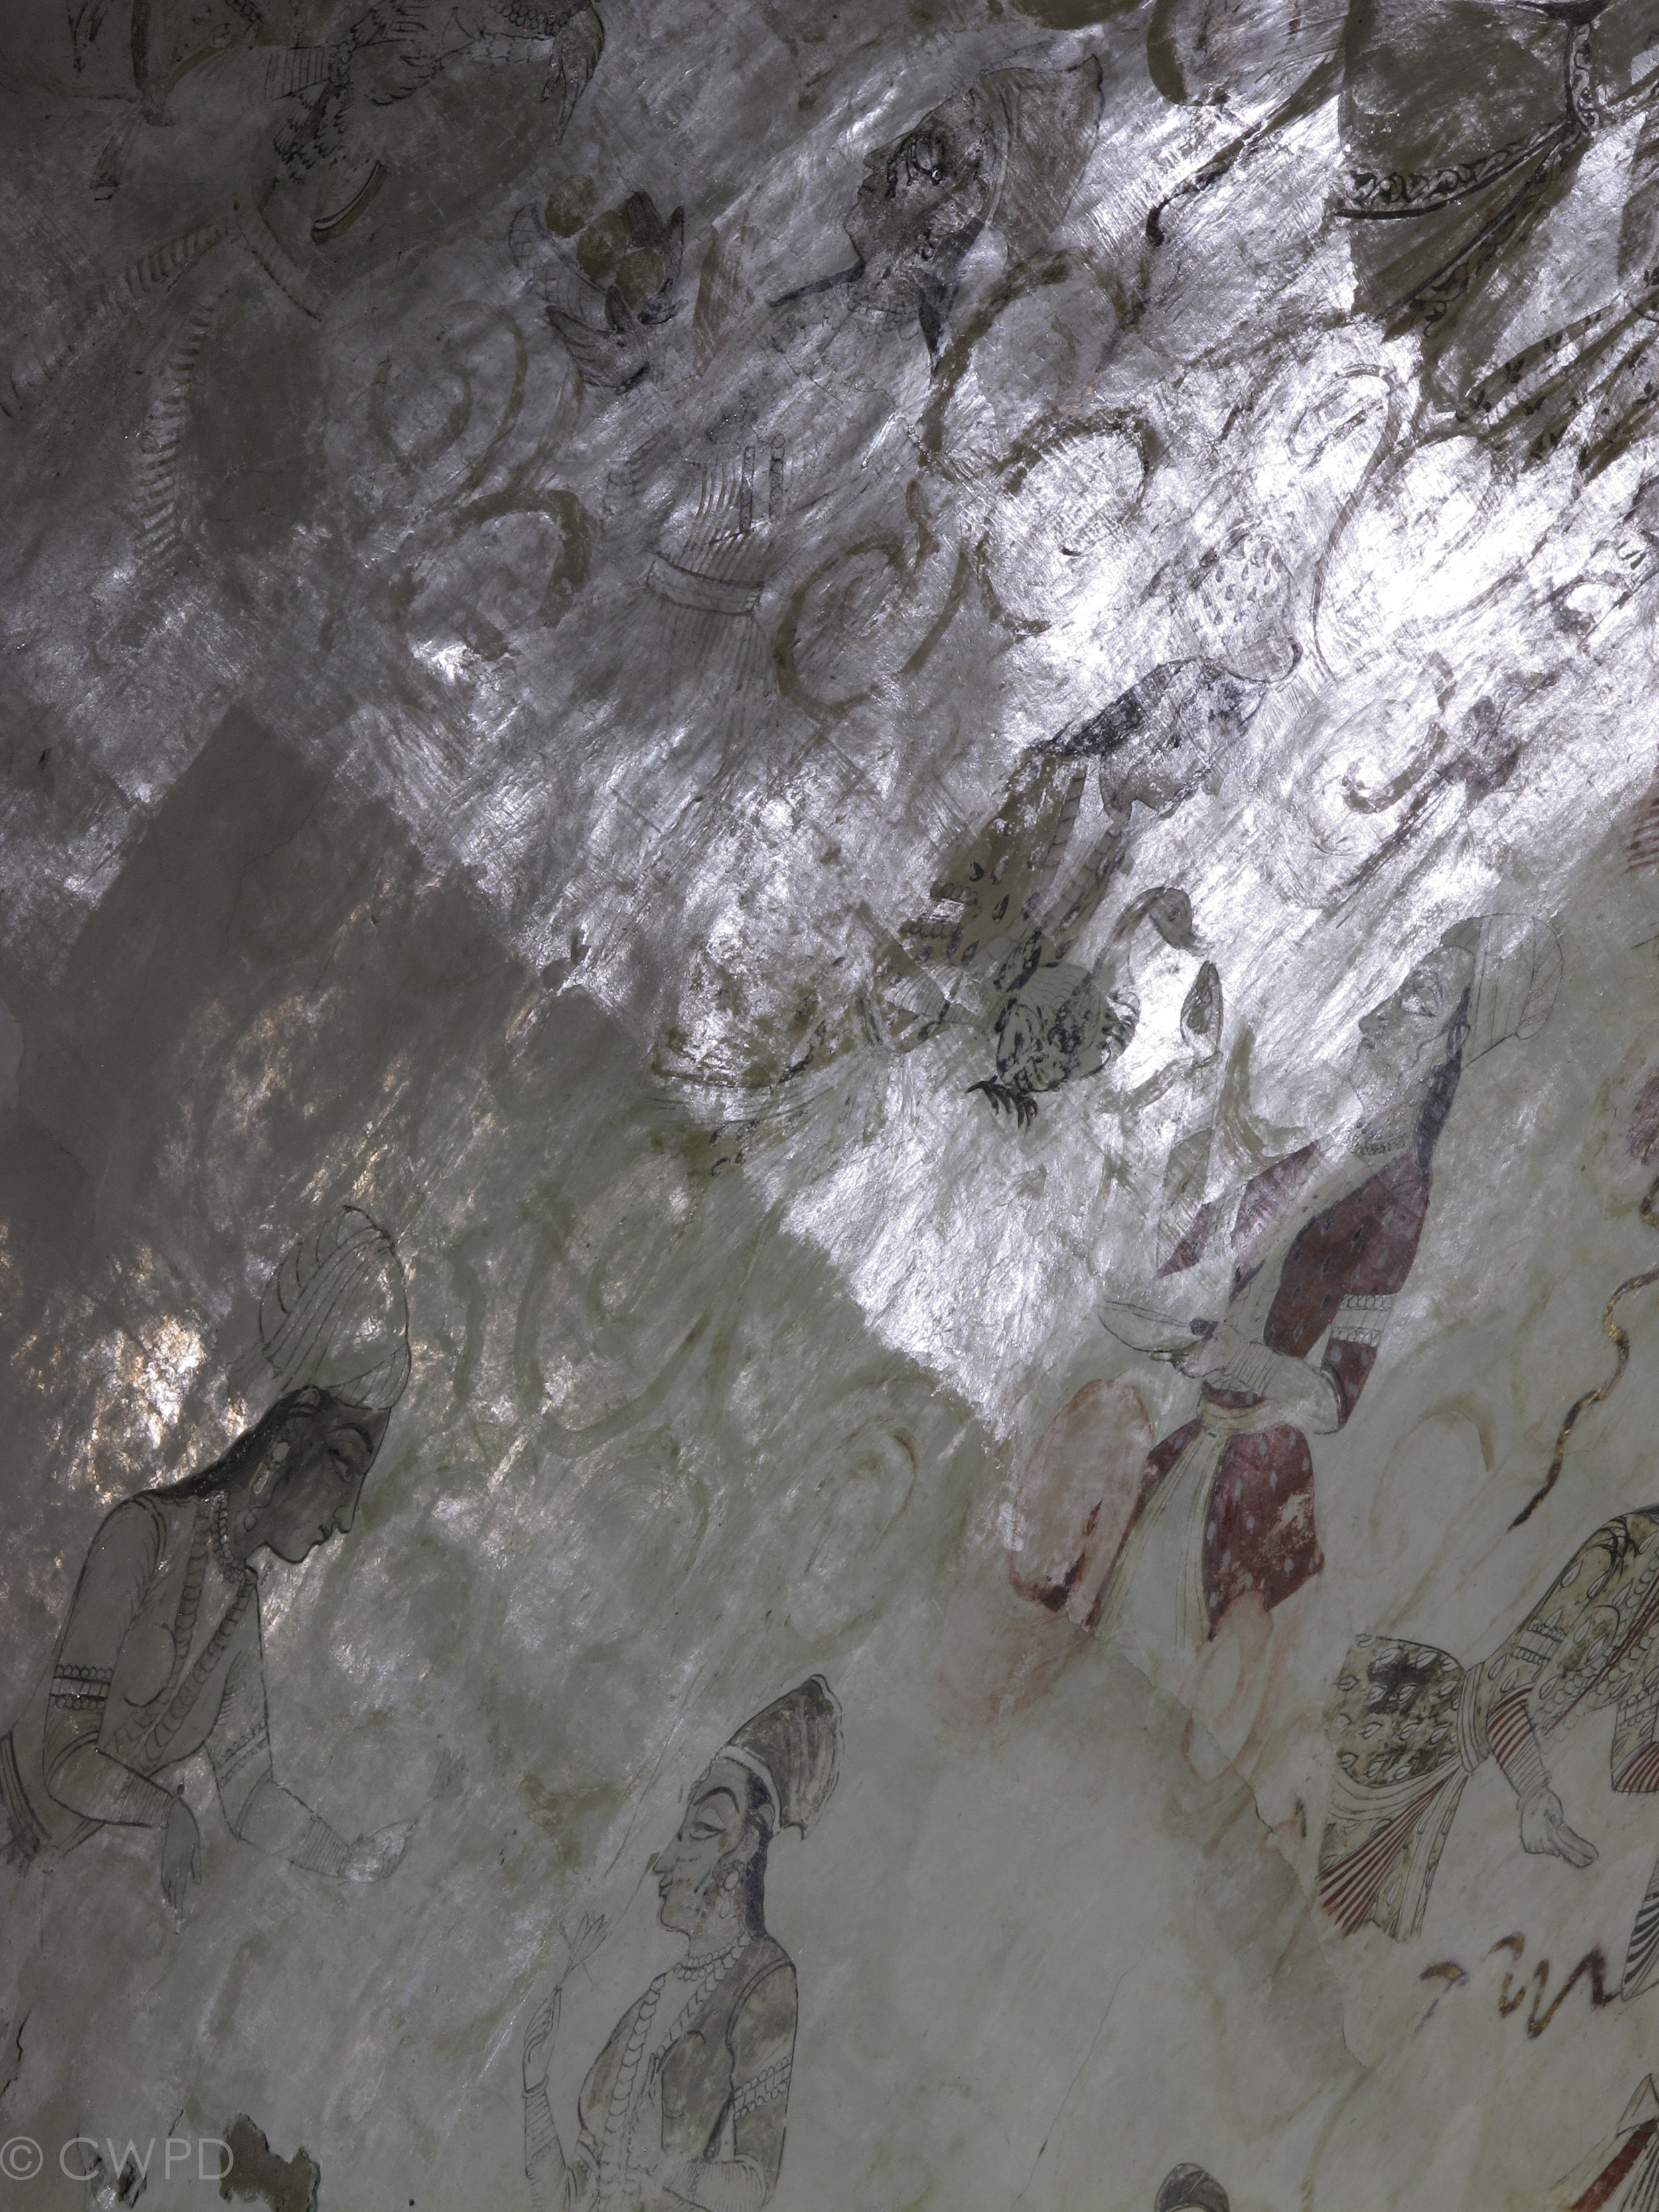  Detail of the vault during coating removal. The coating is clearly visible in the upper portion of the image, giving the paintings a glossy and discolored appearance. Where it has been removed in the bottom portion of the image, the originally matte